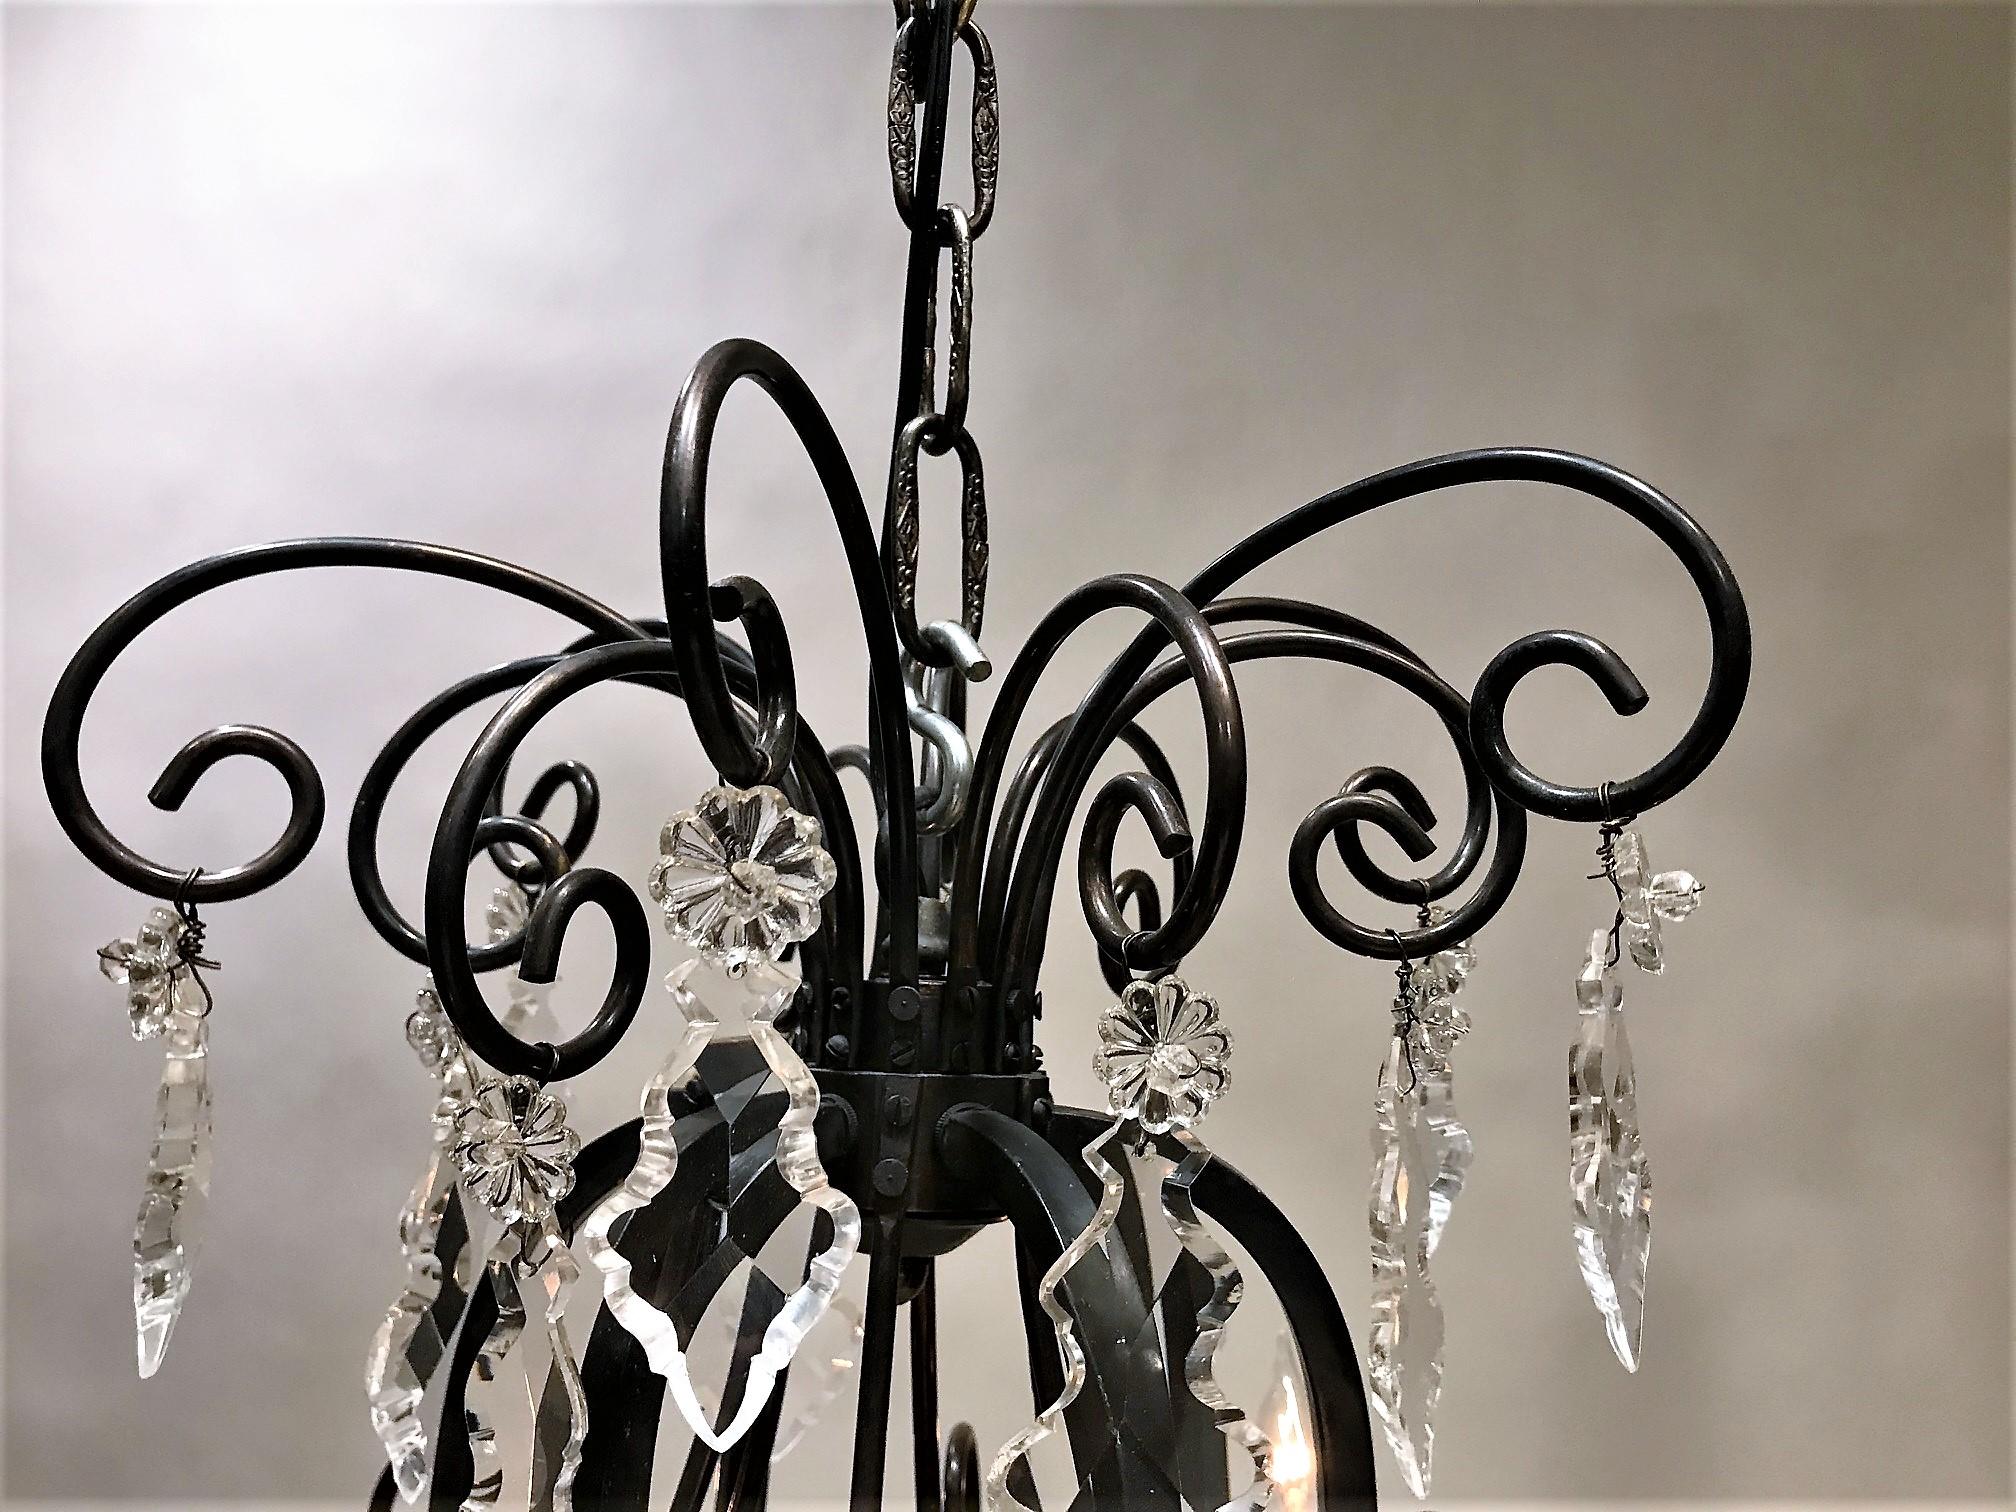 This handsome Louis XV style chandelier was made during the Belle Epoque era somewhere in Continental Europe. Originally candle-burning, it is now wired for electricity to US standards using candelabra-base bulbs of up to 40 watts each. The frame is